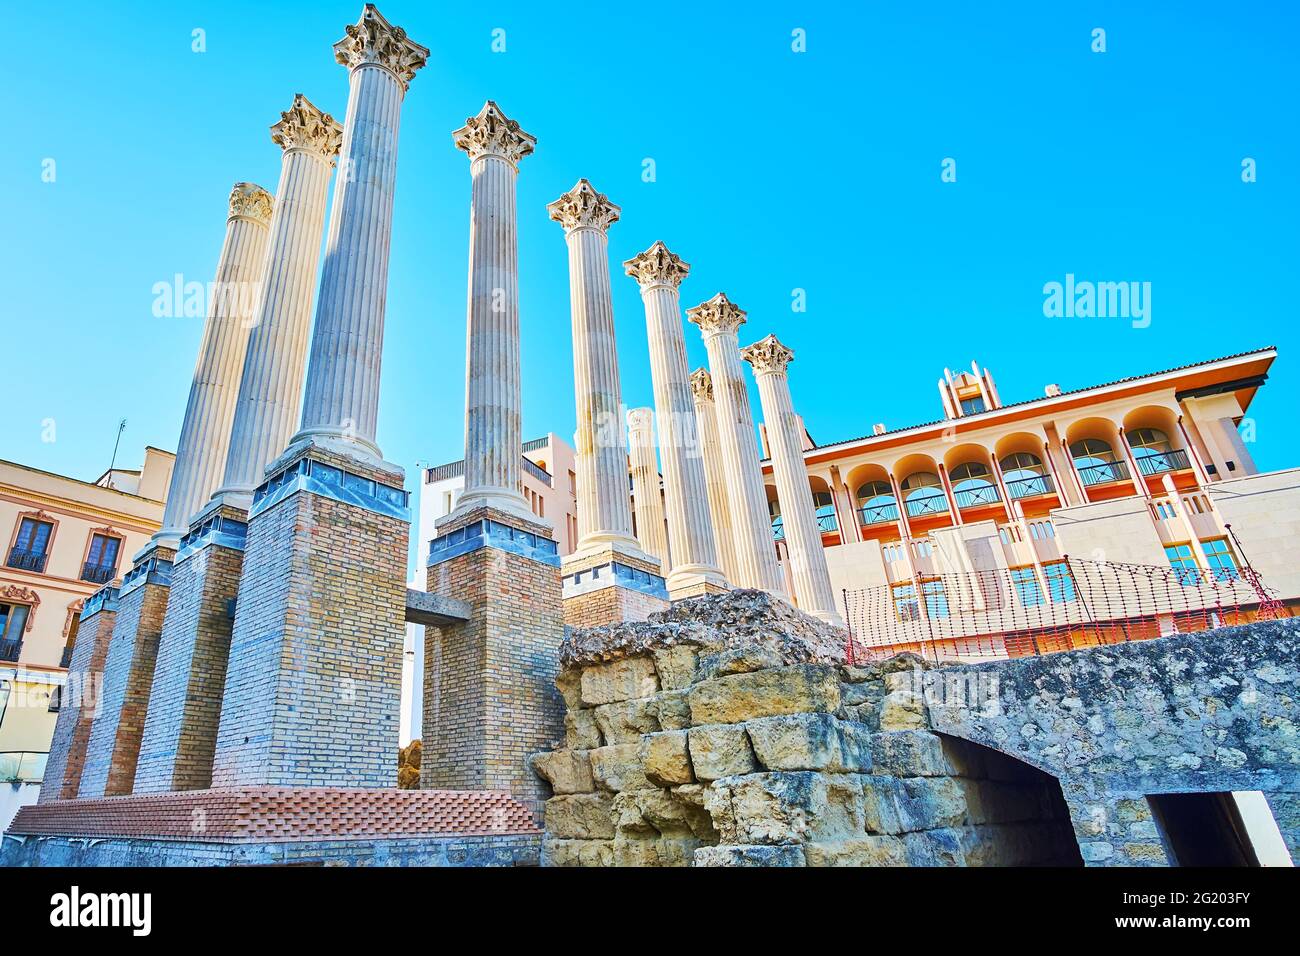 Explore the ruins of the antique Roman Temple, located in Calle Capitulares street in the old town of Cordoba, Spain Stock Photo